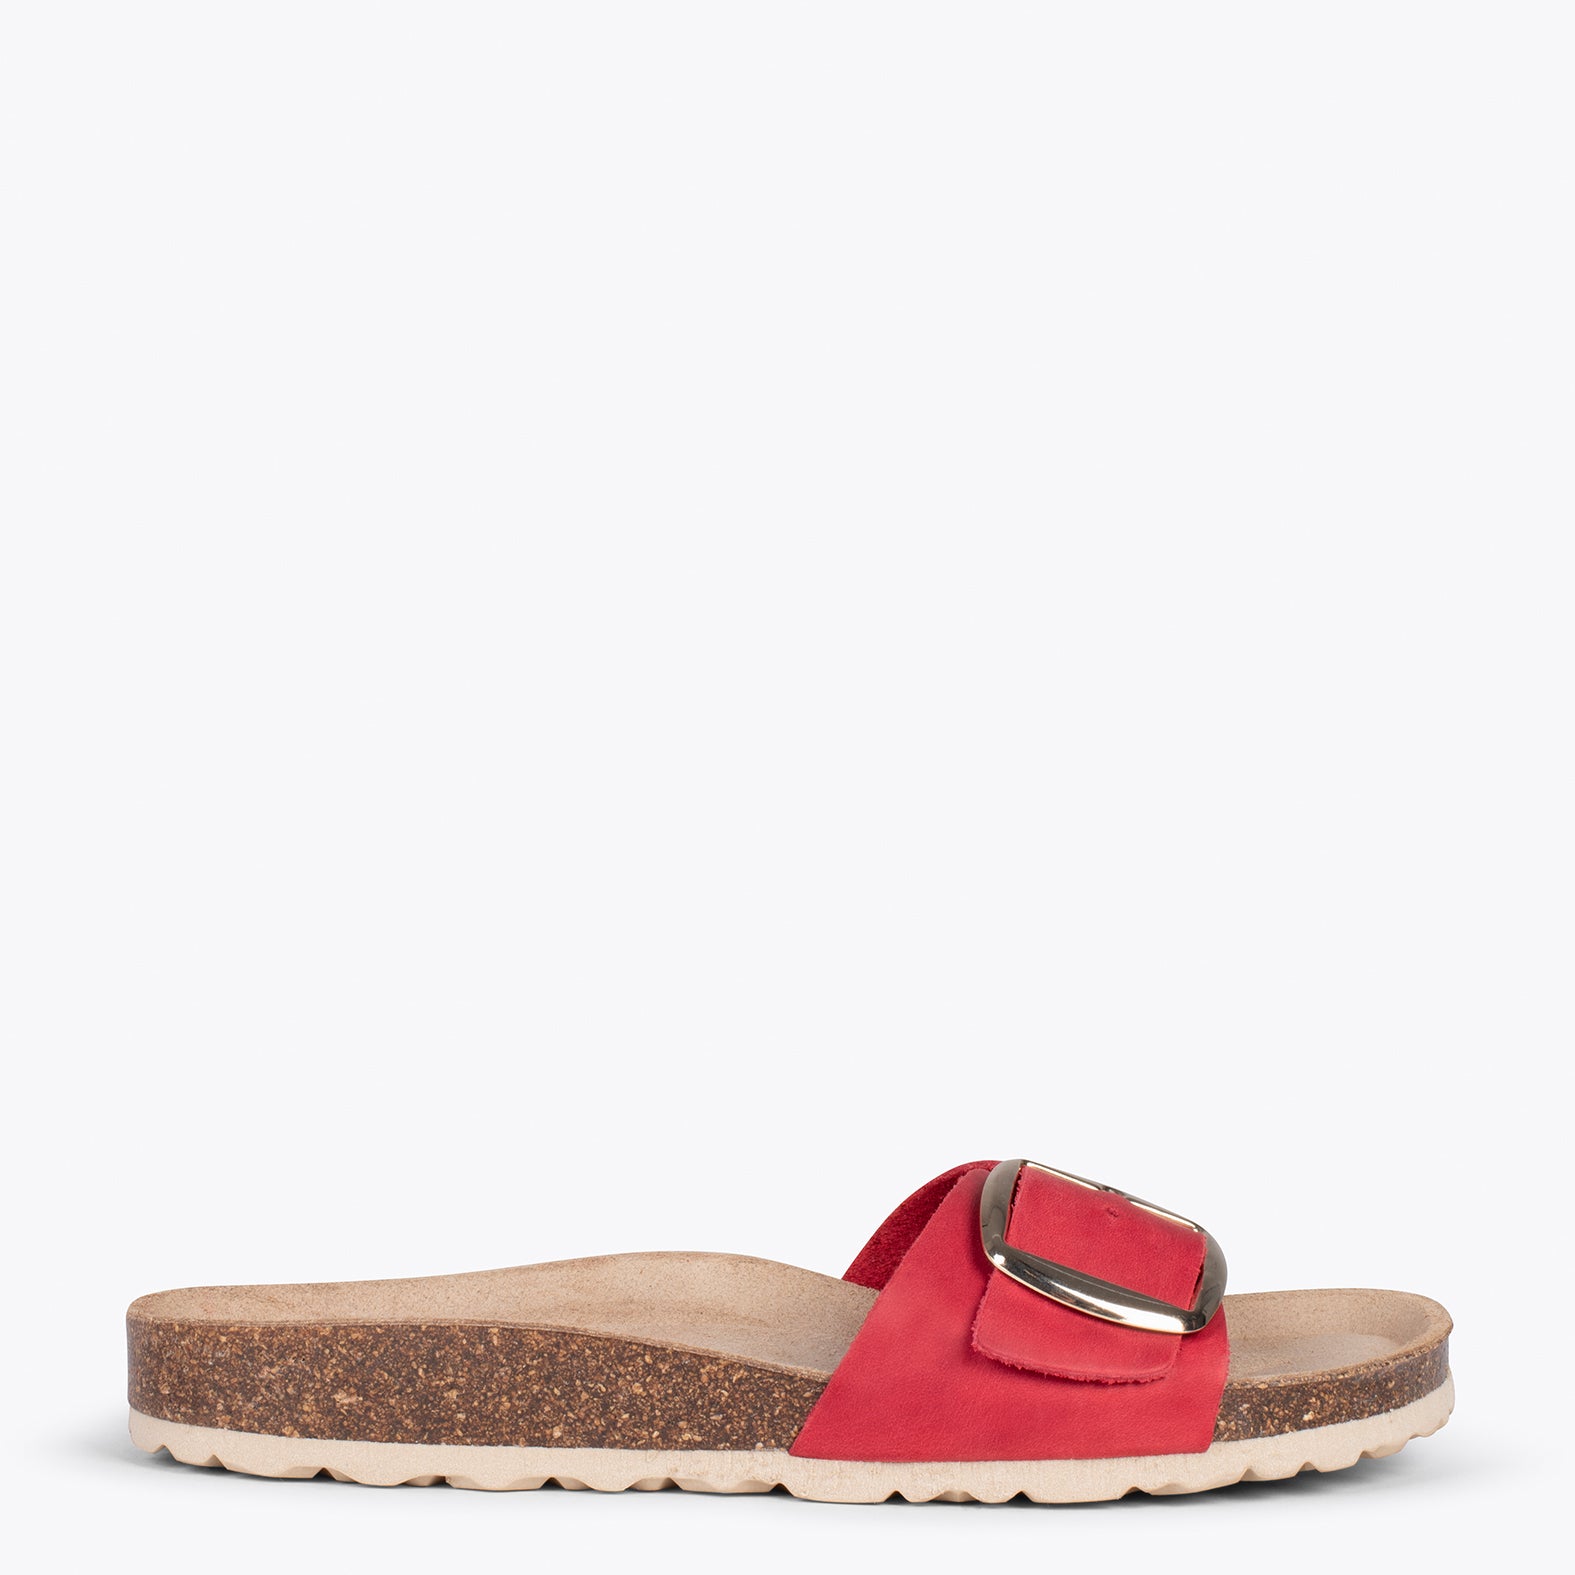 CLAVEL – RED leather slides with buckle23152 ROJO